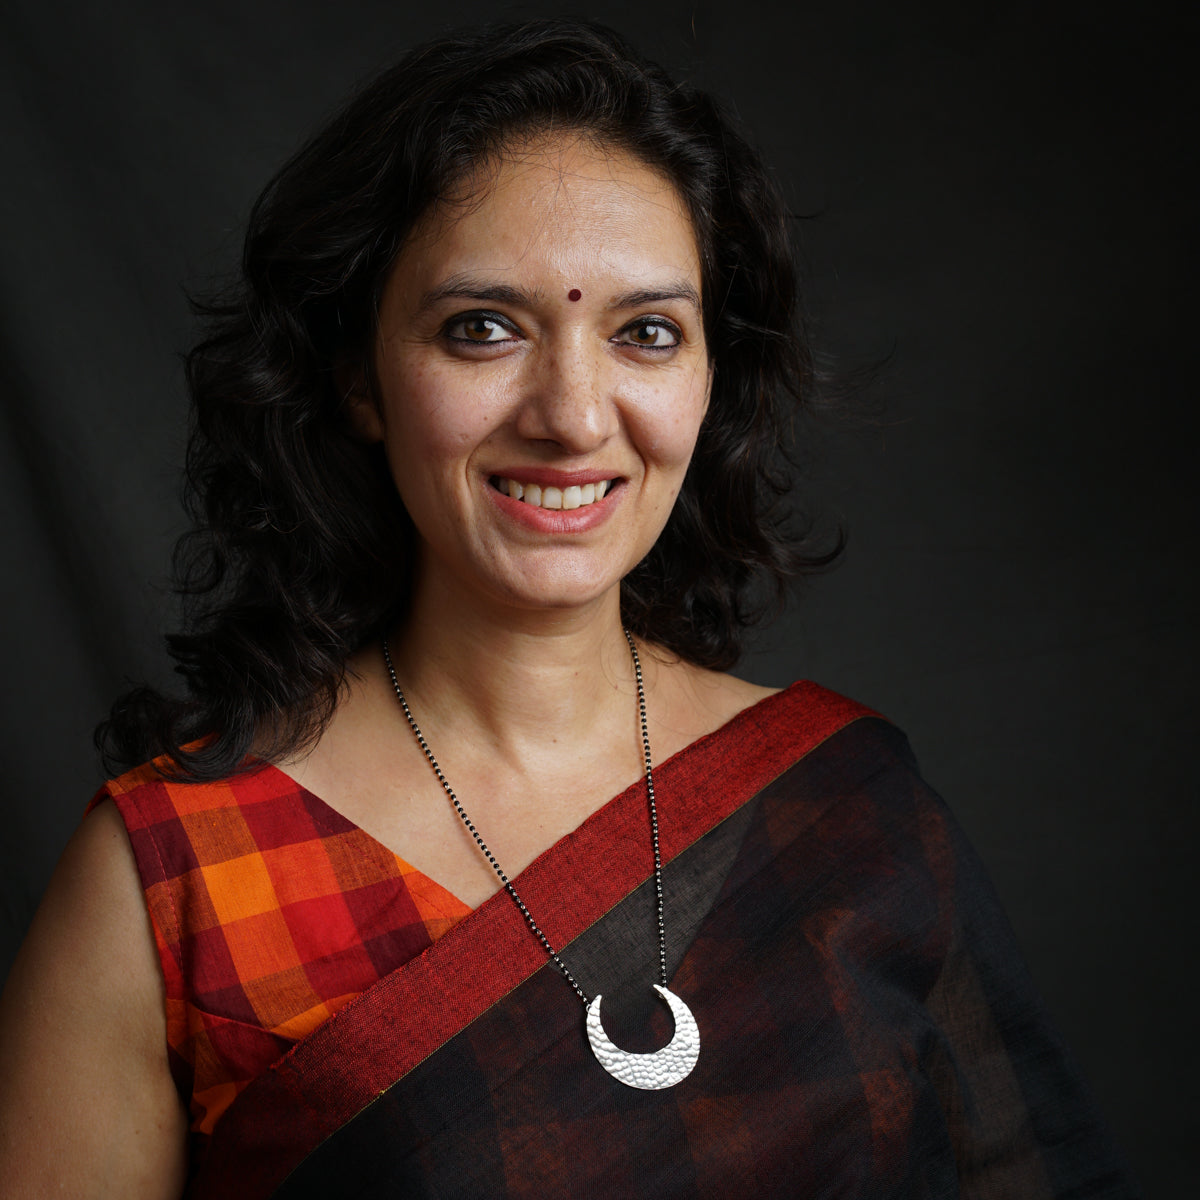 a woman in a red and black sari smiles at the camera